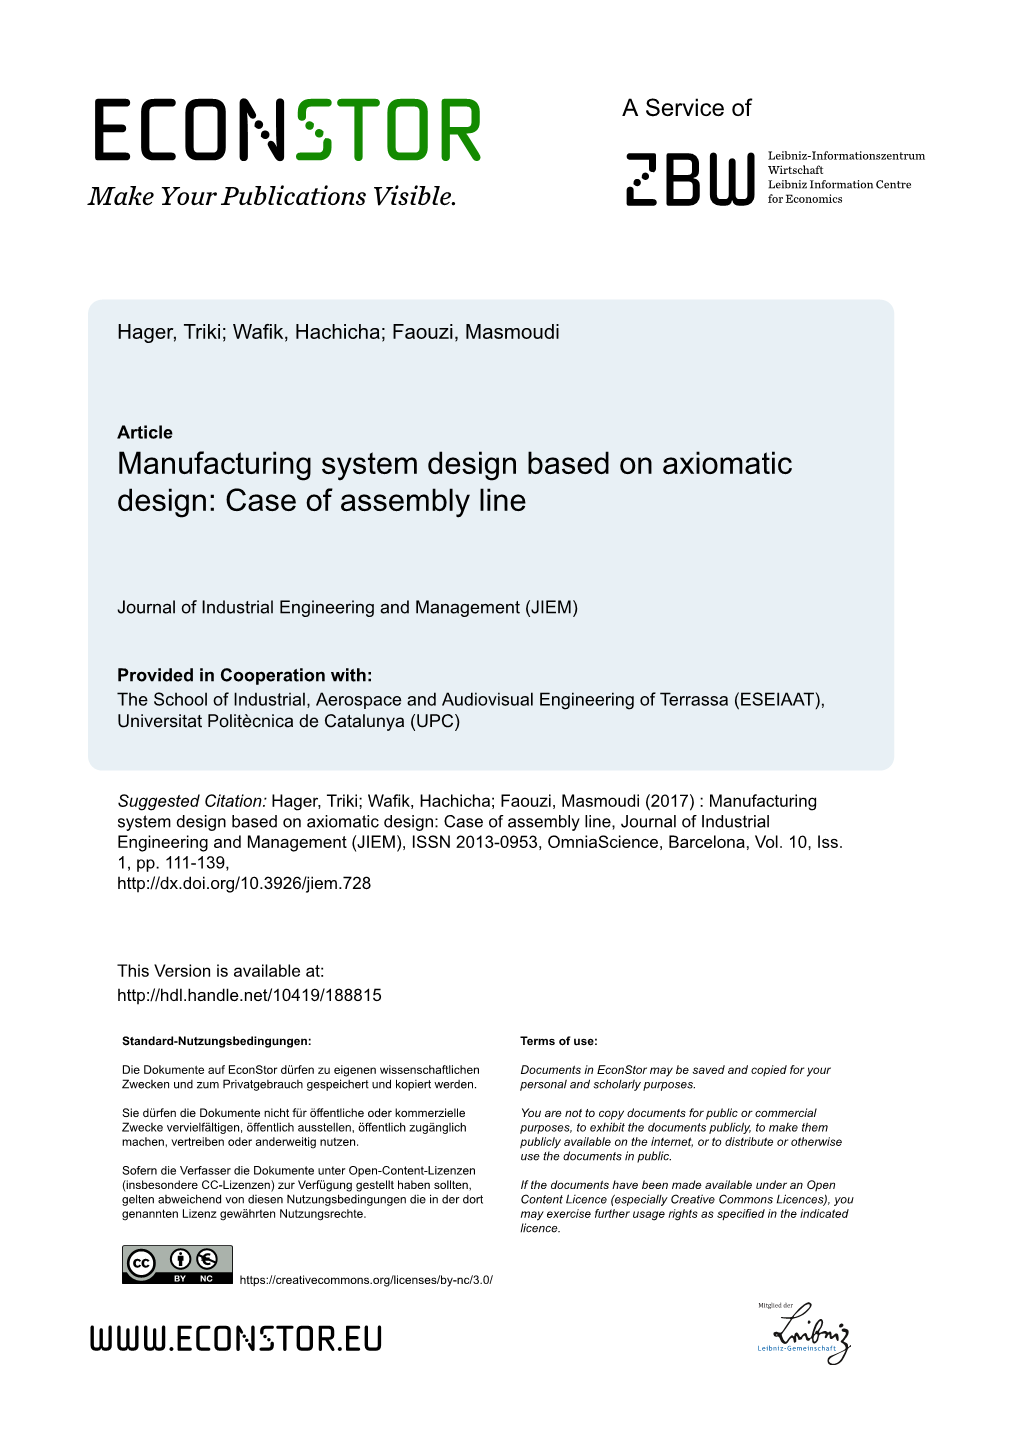 Manufacturing System Design Based on Axiomatic Design: Case of Assembly Line